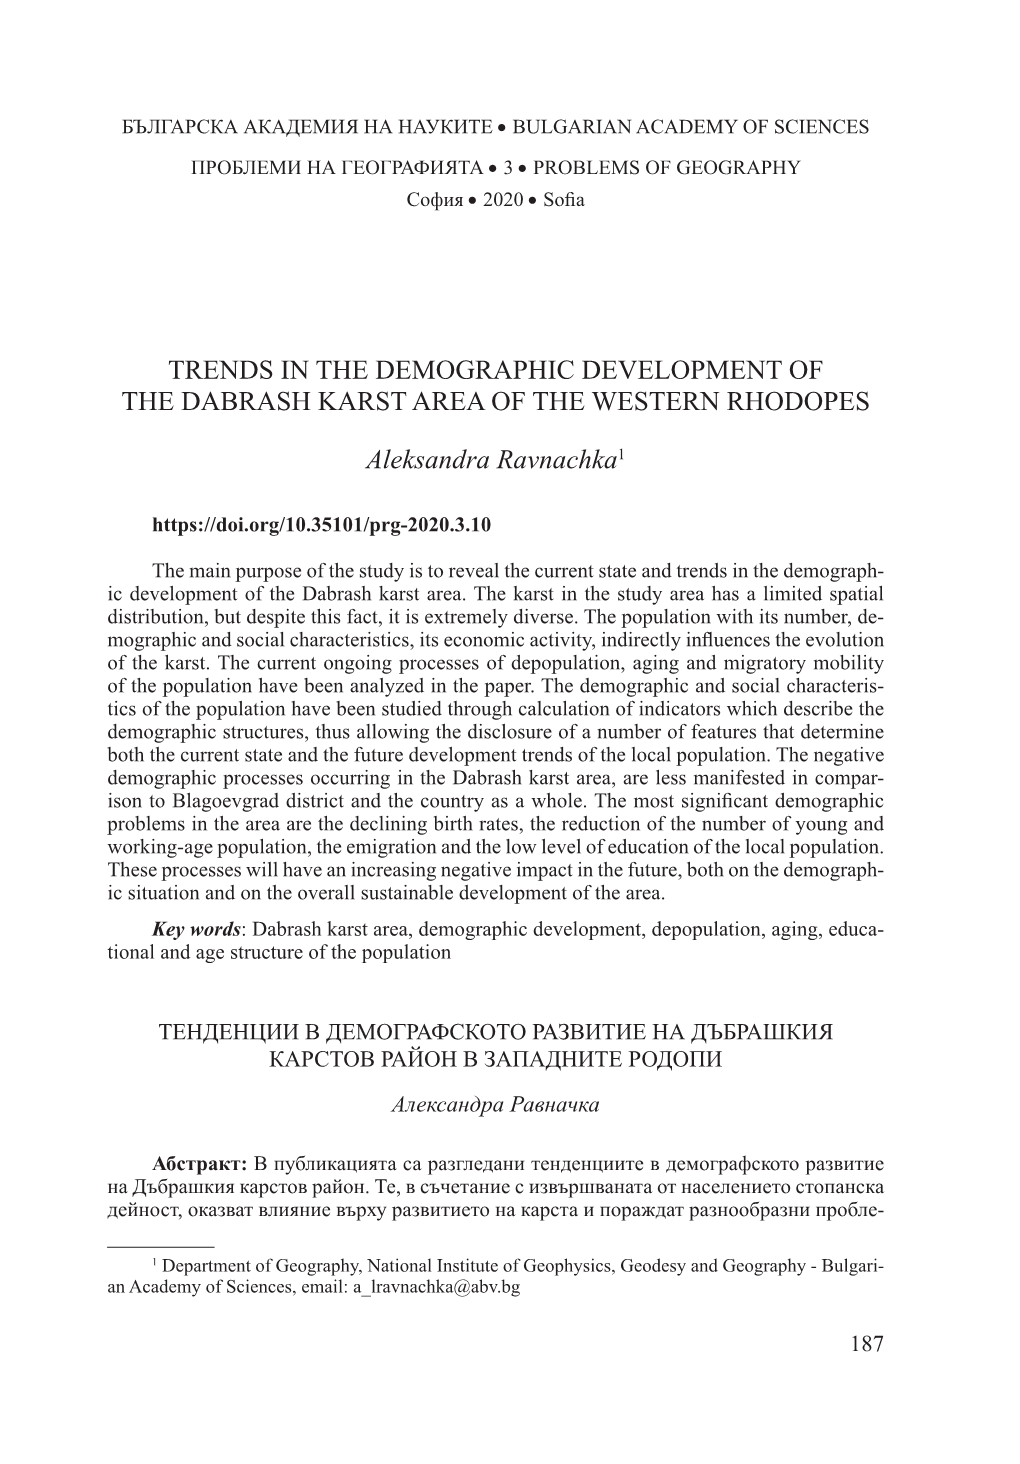 Trends in the Demographic Development of the Dabrash Karst Area of the Western Rhodopes